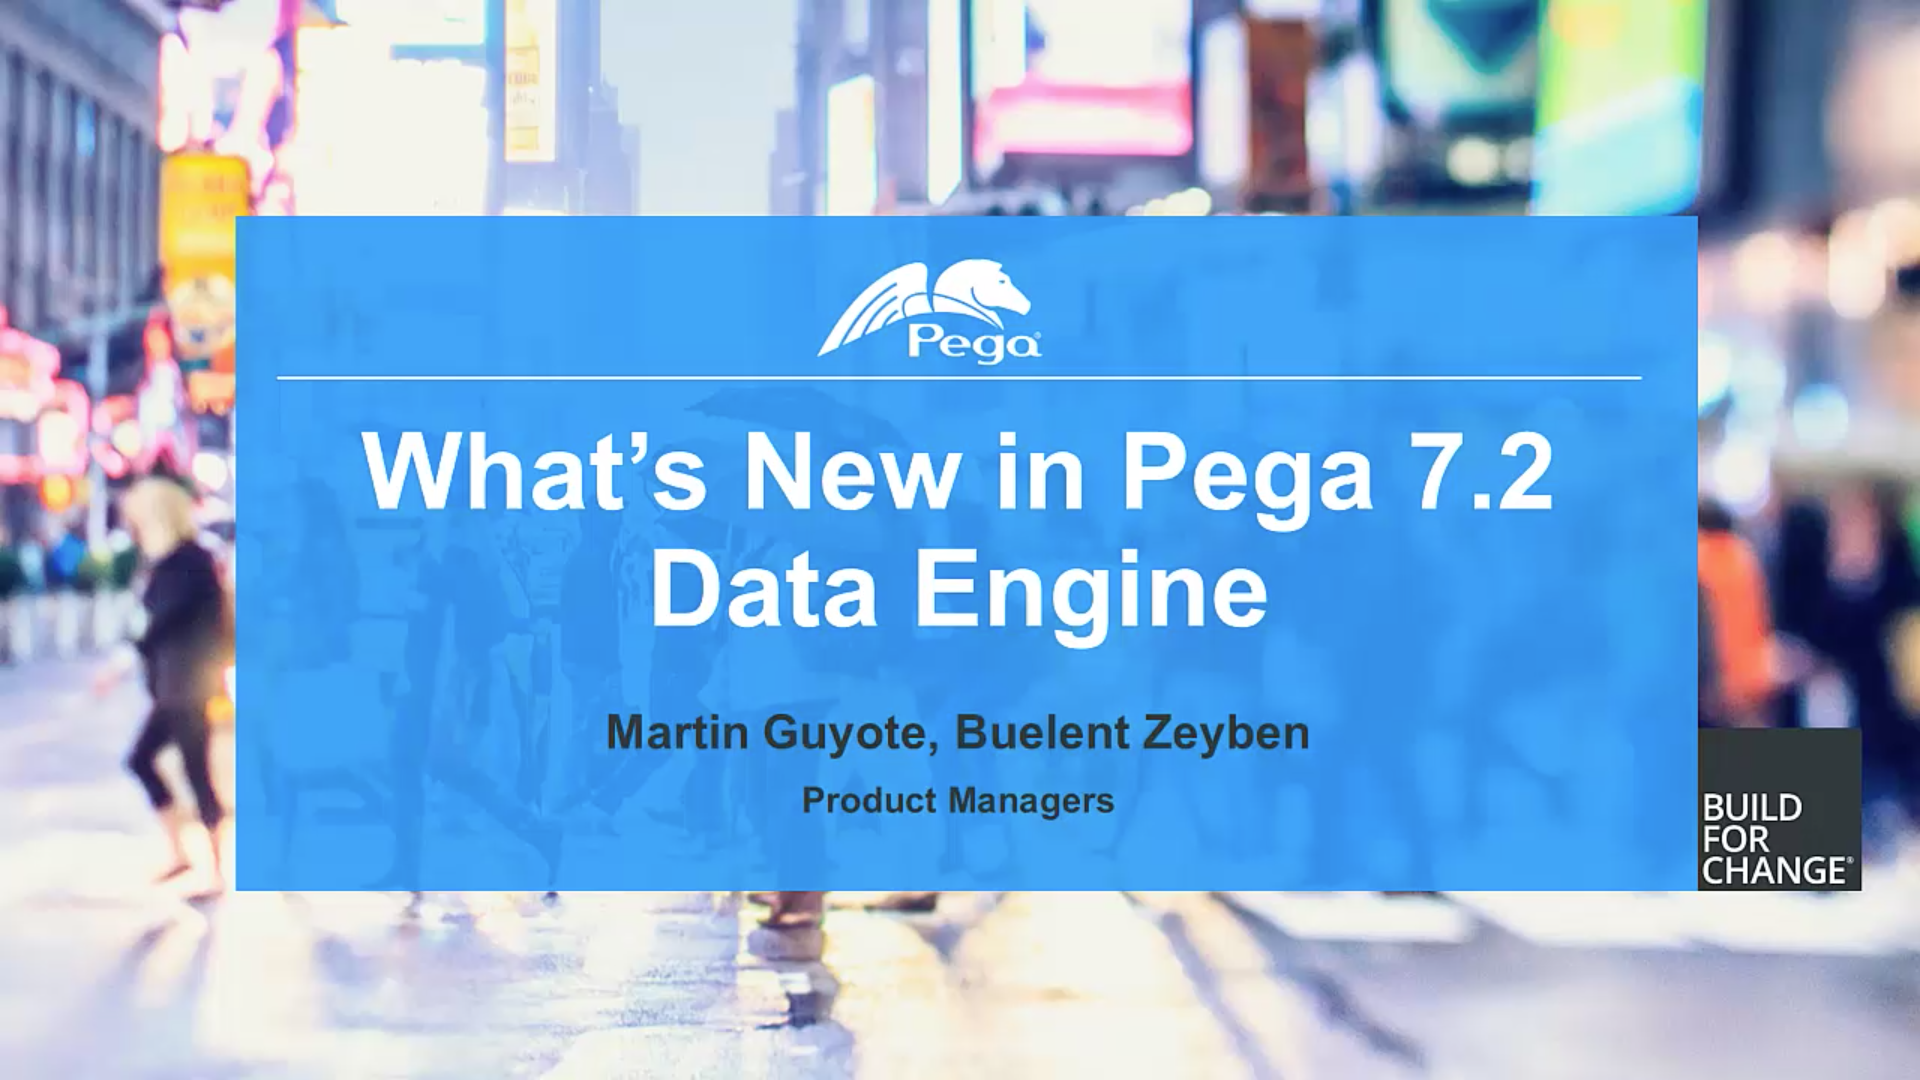 Pega 7.2 Update: What's New in Data Engine